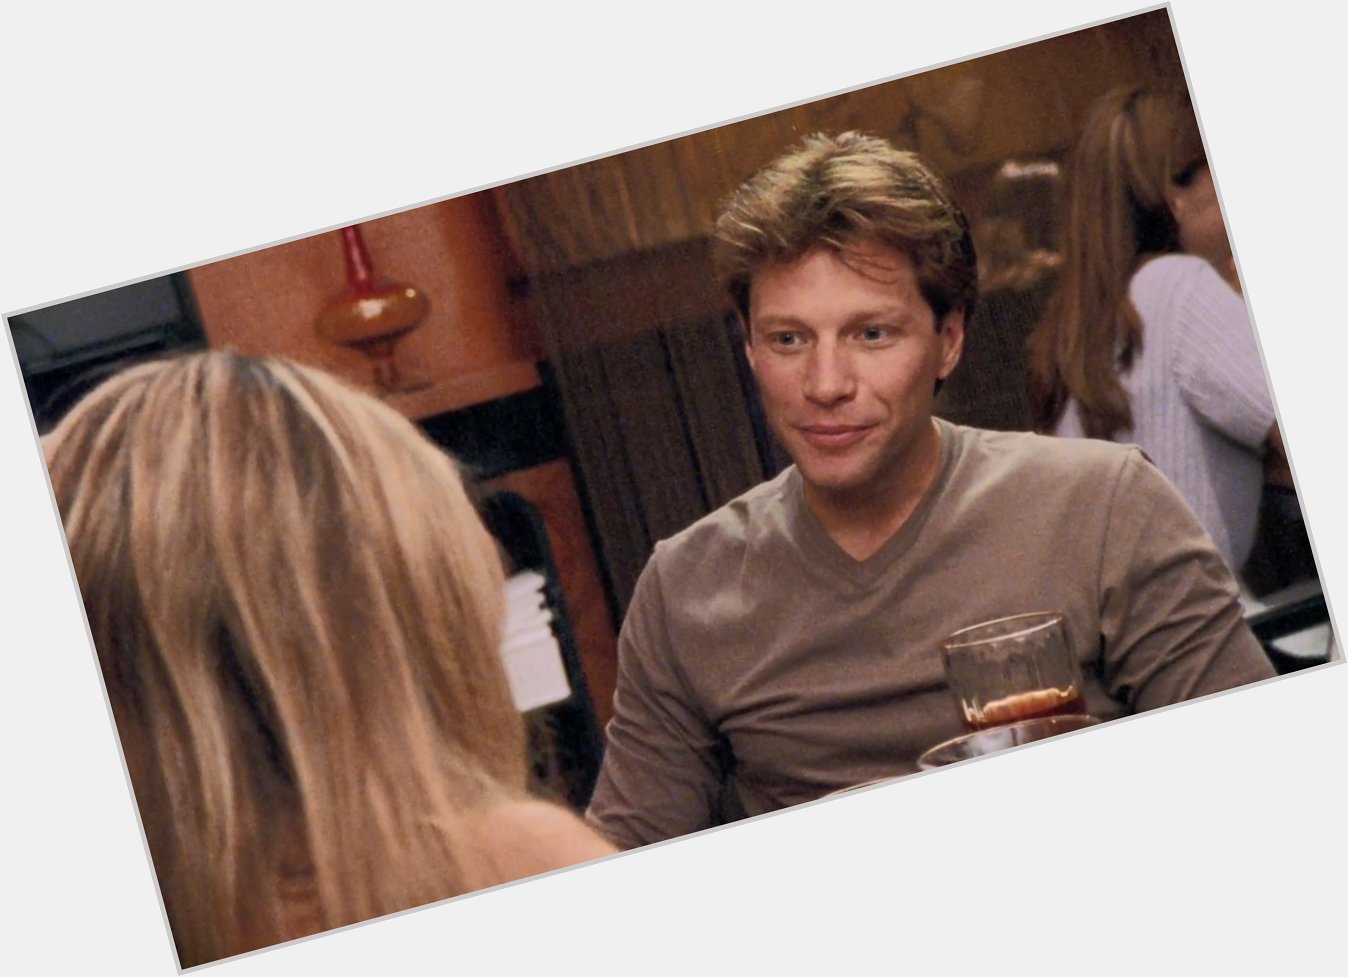 Happy birthday to Jon Bon Jovi, whose SEX AND THE CITY episode I still can\t forget. 